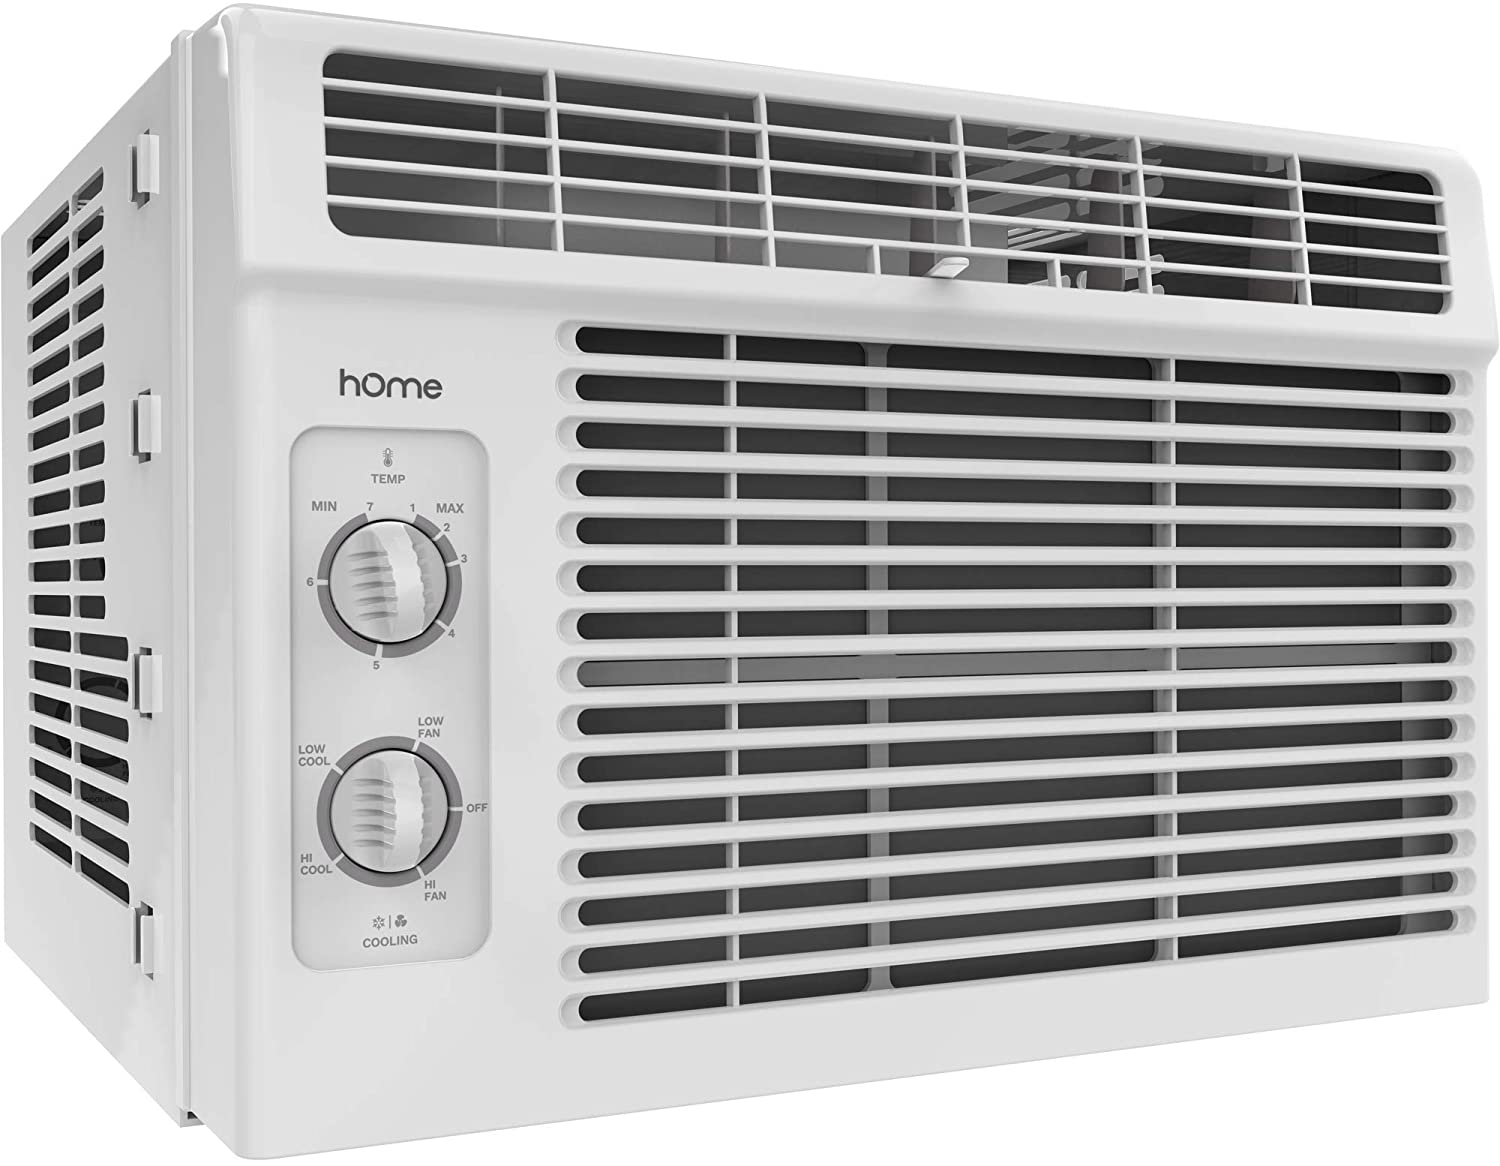 hOmeLabs Window Air Conditioner 5000 BTU - Easy Mechanical Control Compact AC Unit with Washable Reusable Filter, 2 Cooling Speeds, 2 Fan Speeds - Ideal for Bedroom and Rooms up to 150 Sq. Ft. - image 1 of 9